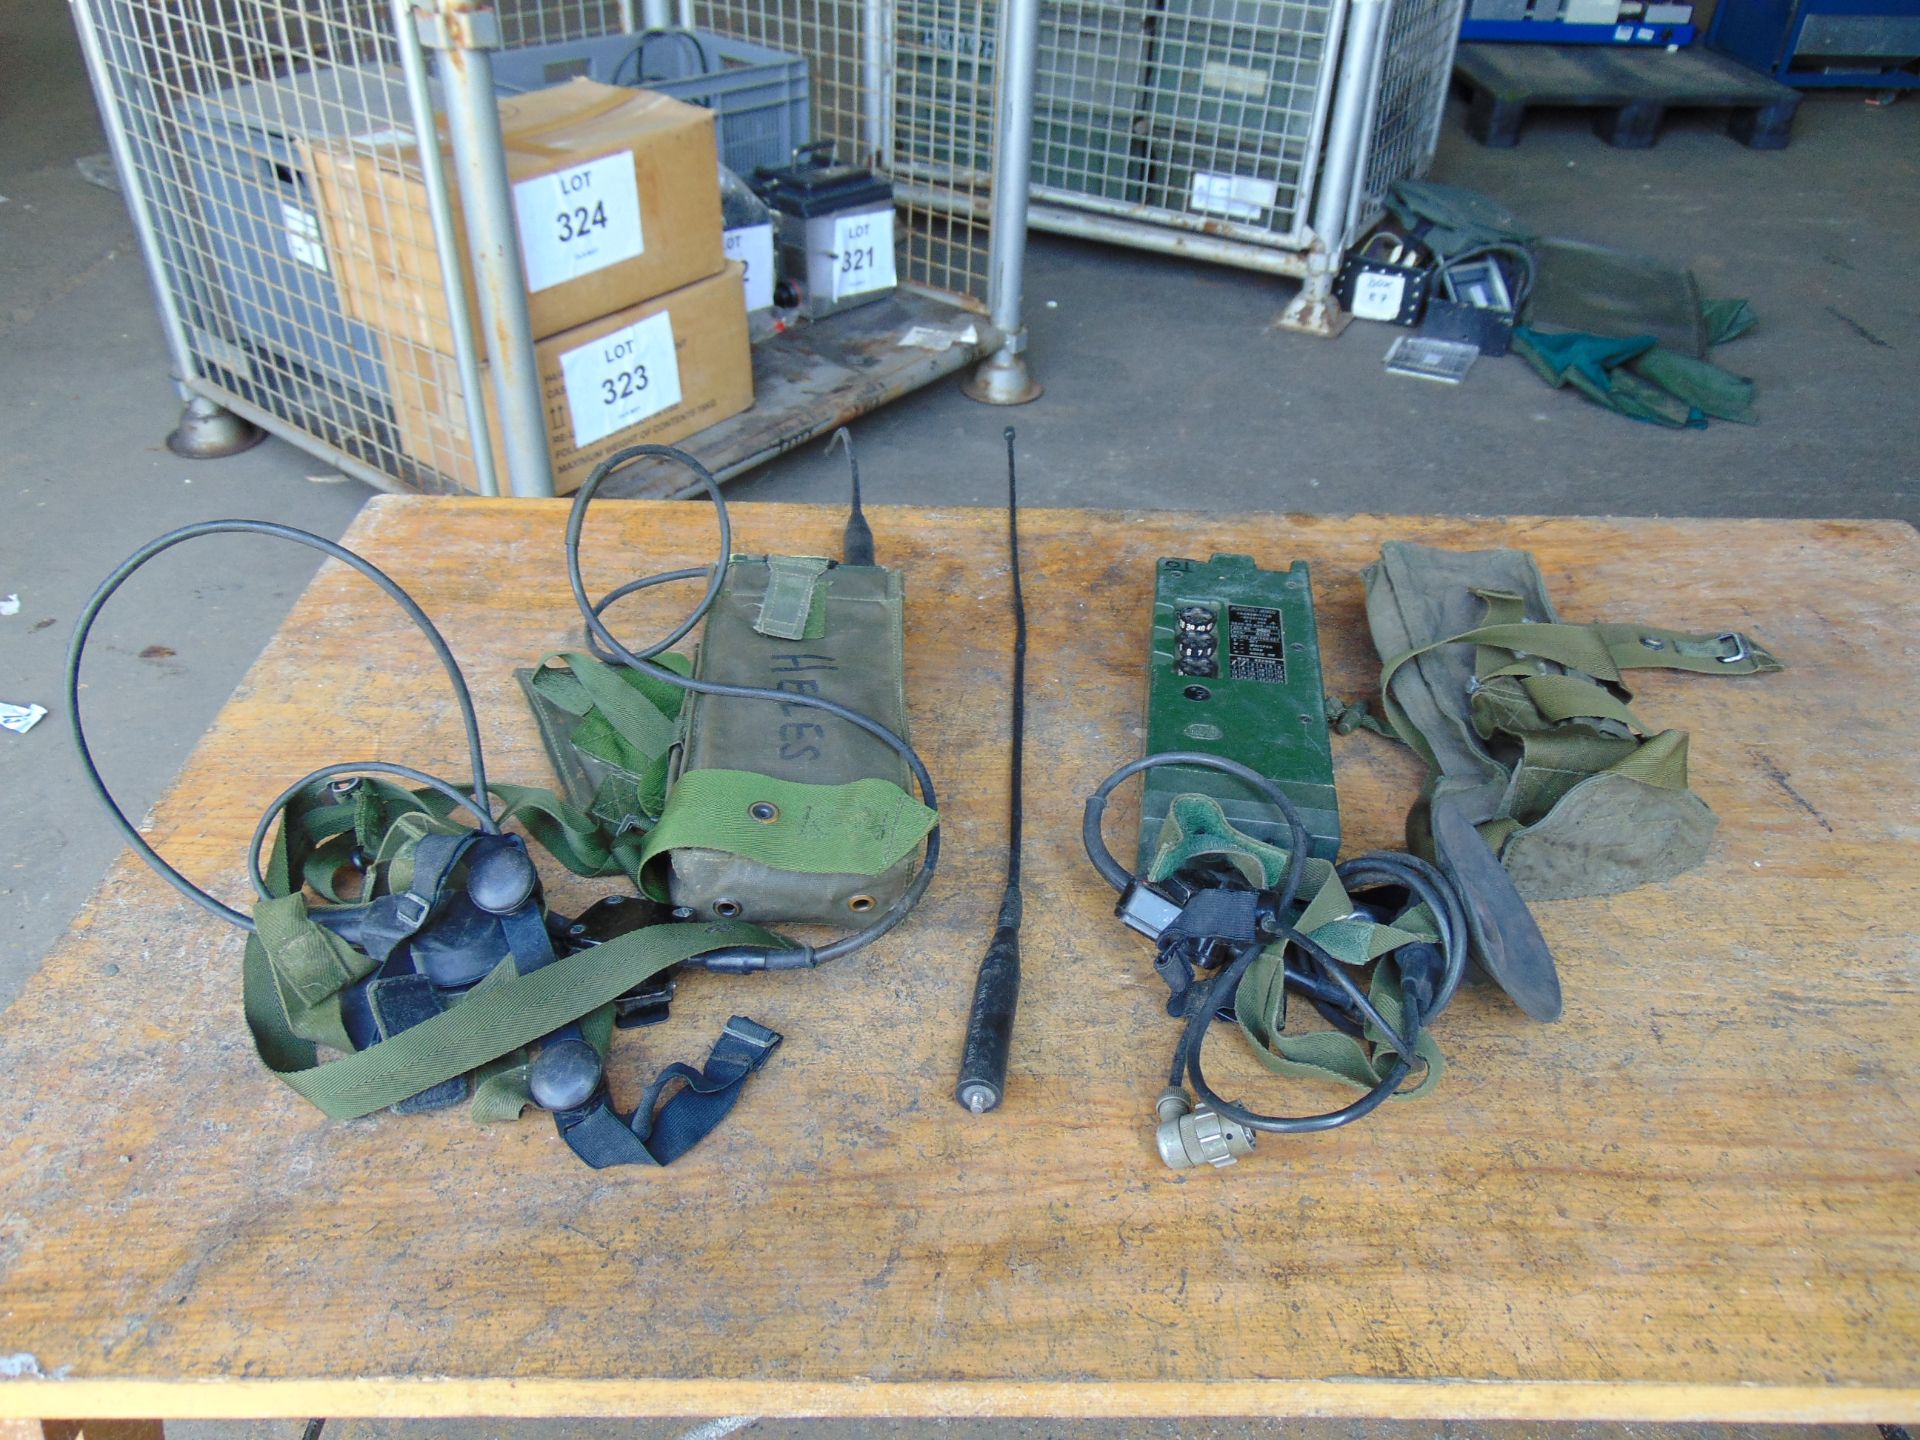 2 x RT 349 British Army Transmitter / Receiver c/w Pouch, Headset, Antenna and Battery Cassette - Image 2 of 5